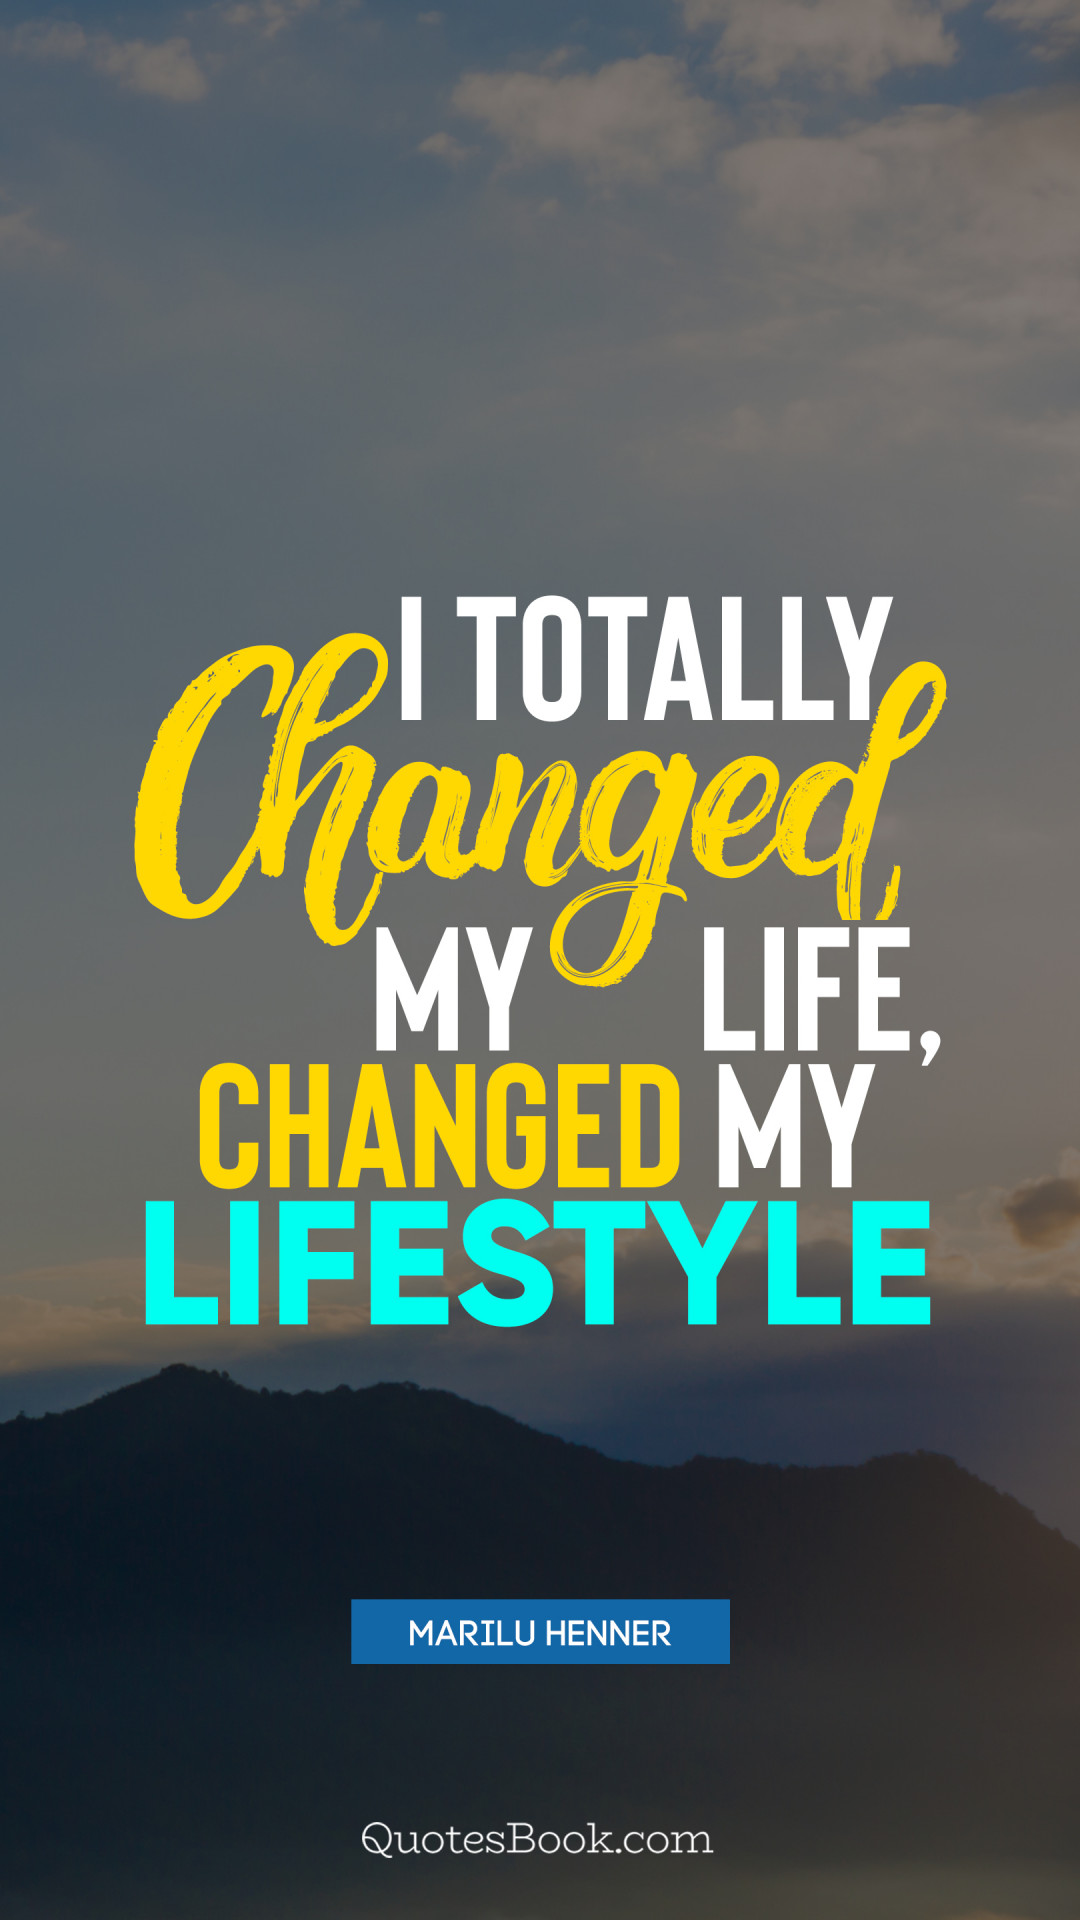 i totally changed my life changed my lifestyle 1080x1920 4775